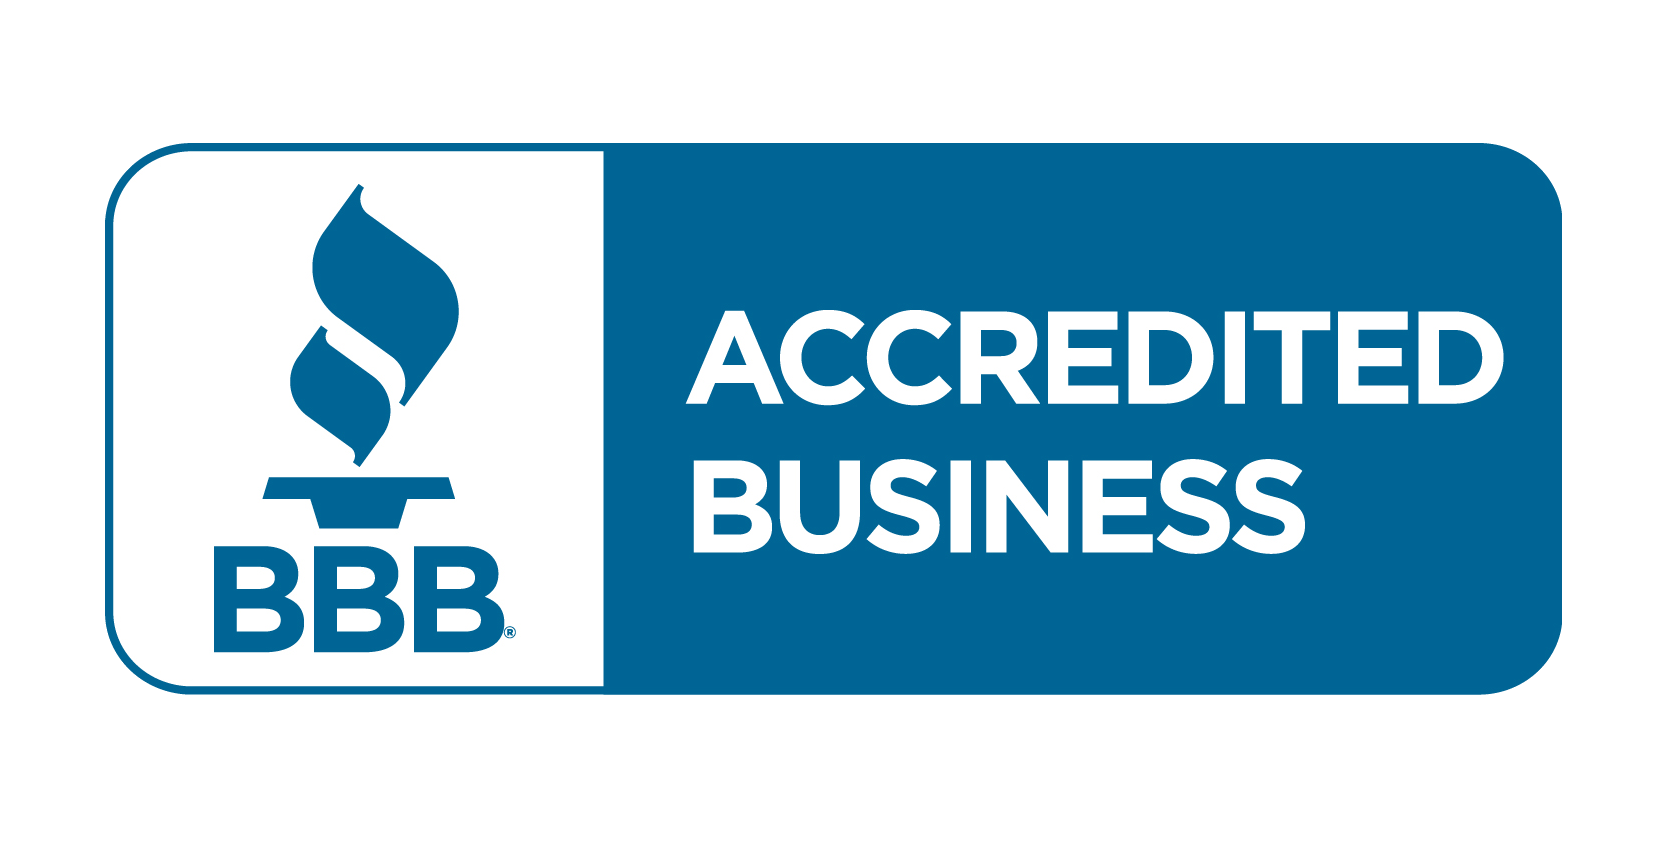 Cal Pro Roofing is recognized by the better business bureau